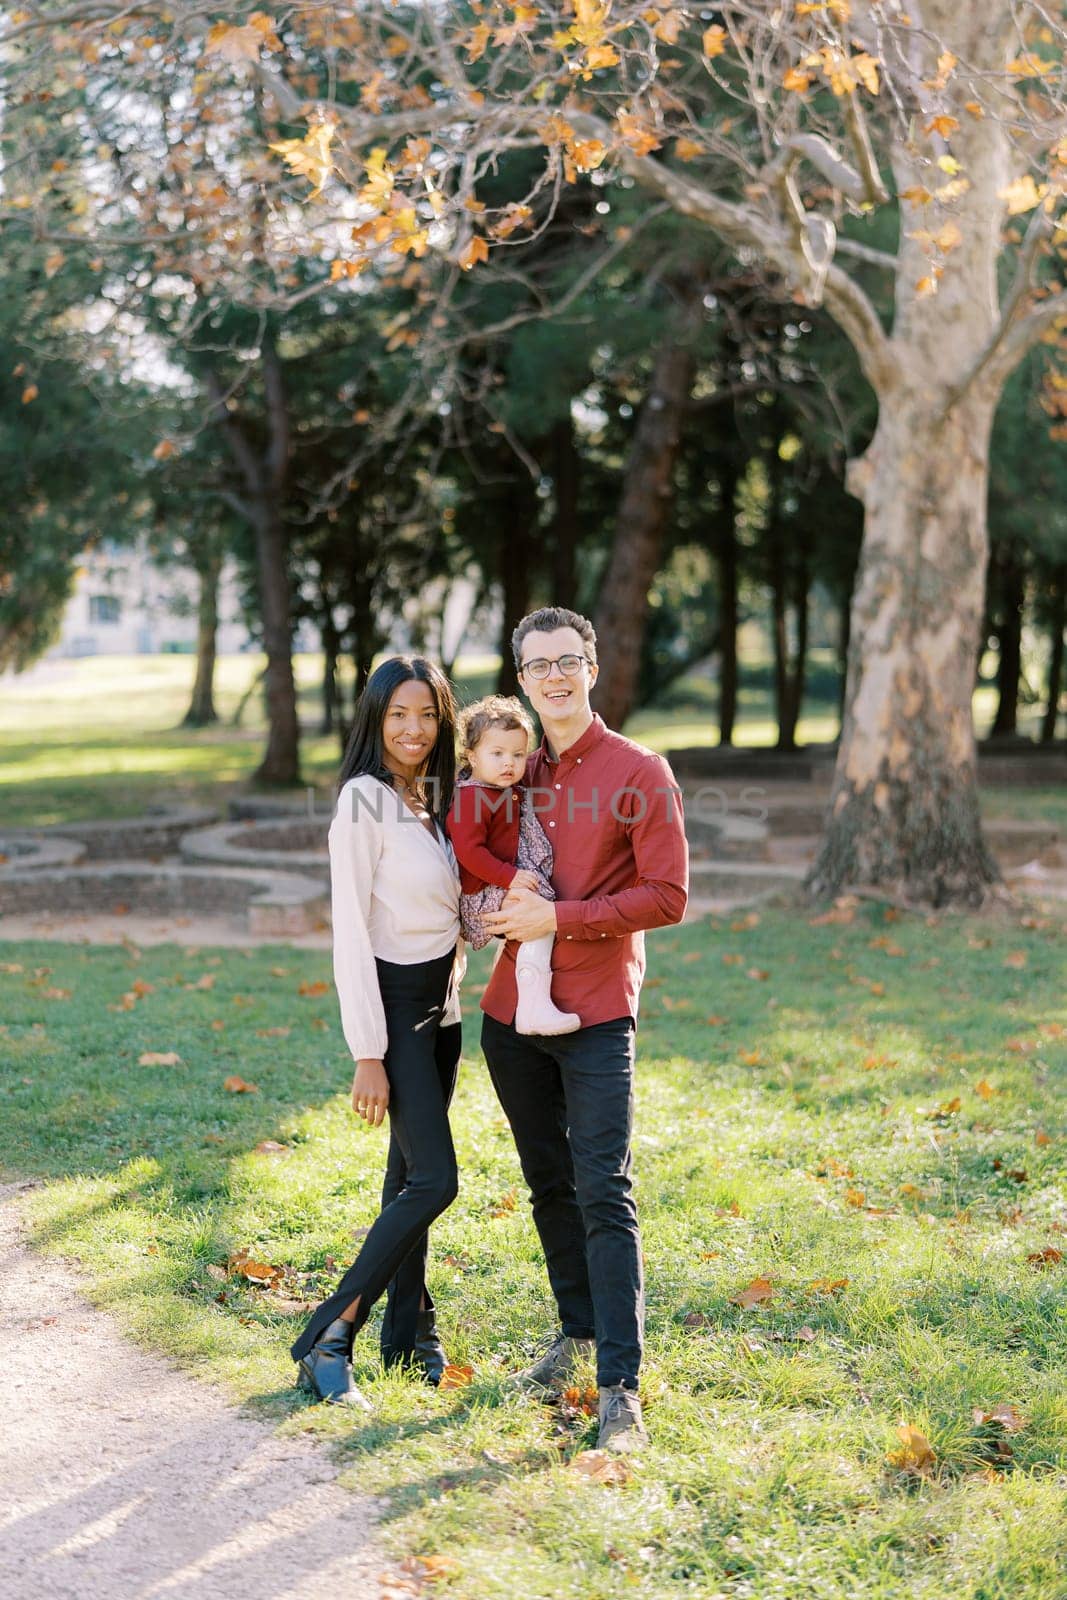 Mom stands next to dad holding a little girl in the park. High quality photo